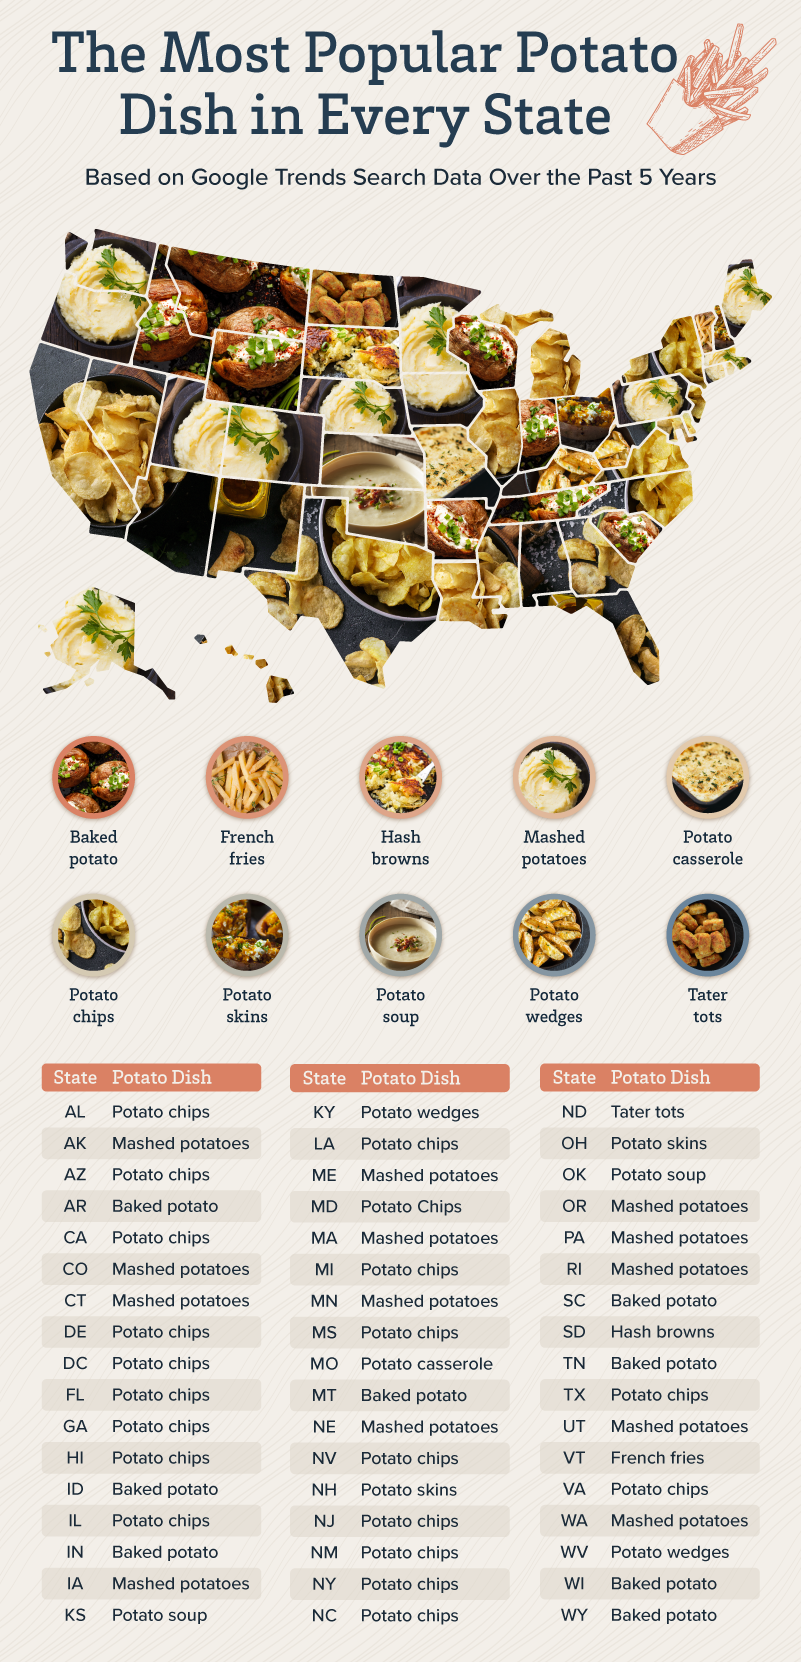 A map of the U.S. displaying the top-searched potato dish in each state.